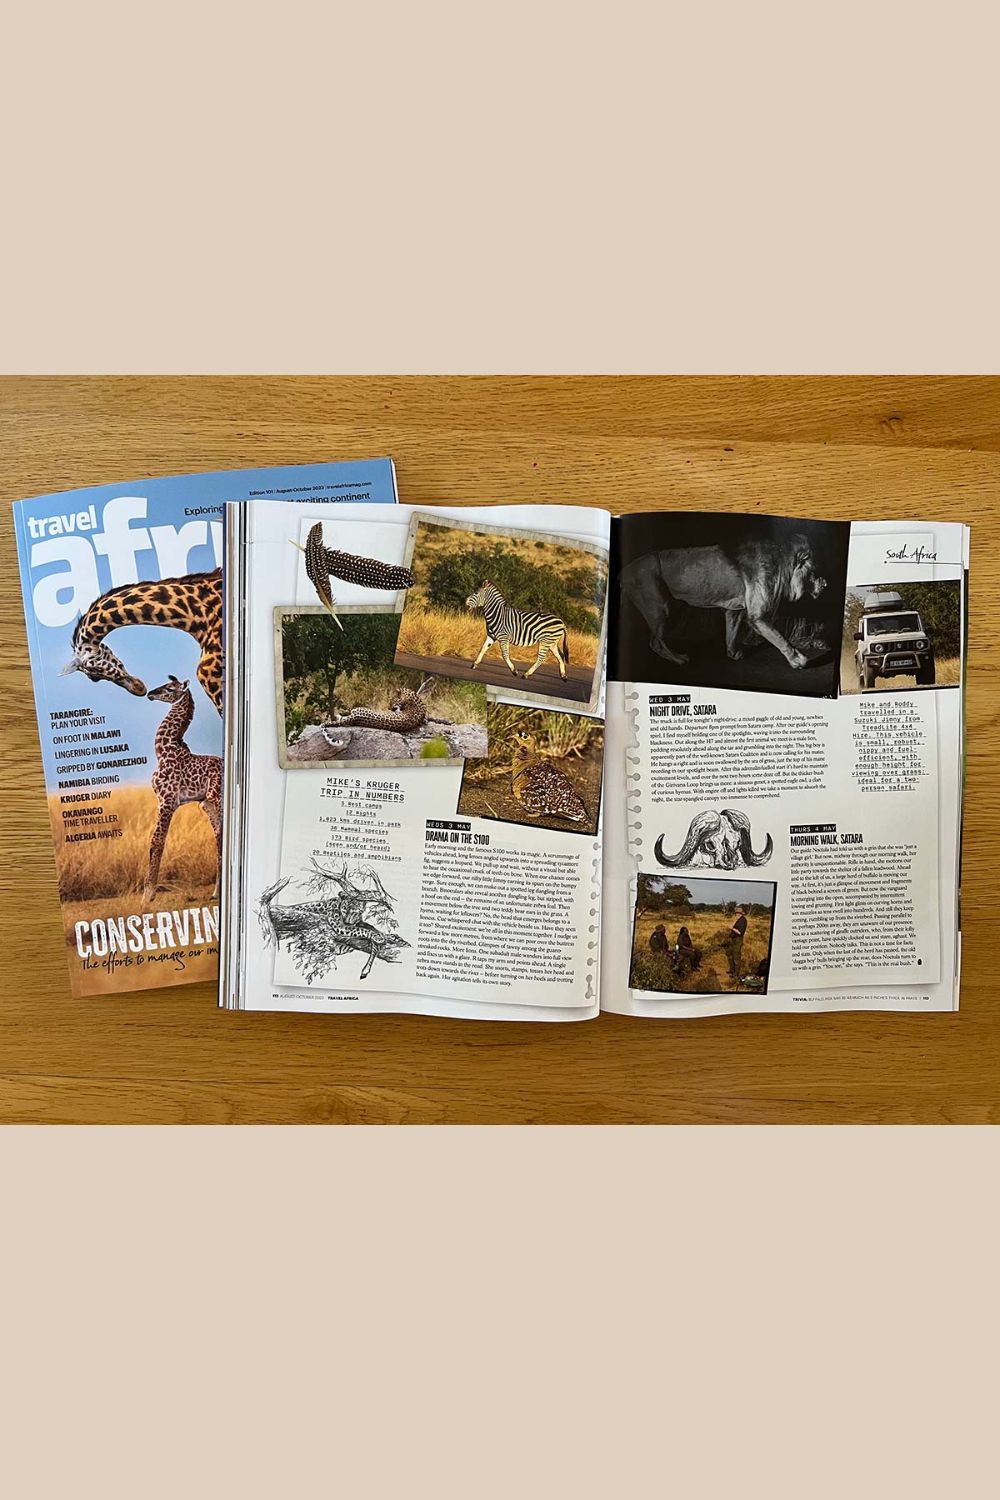 Travel Africa Issue 101